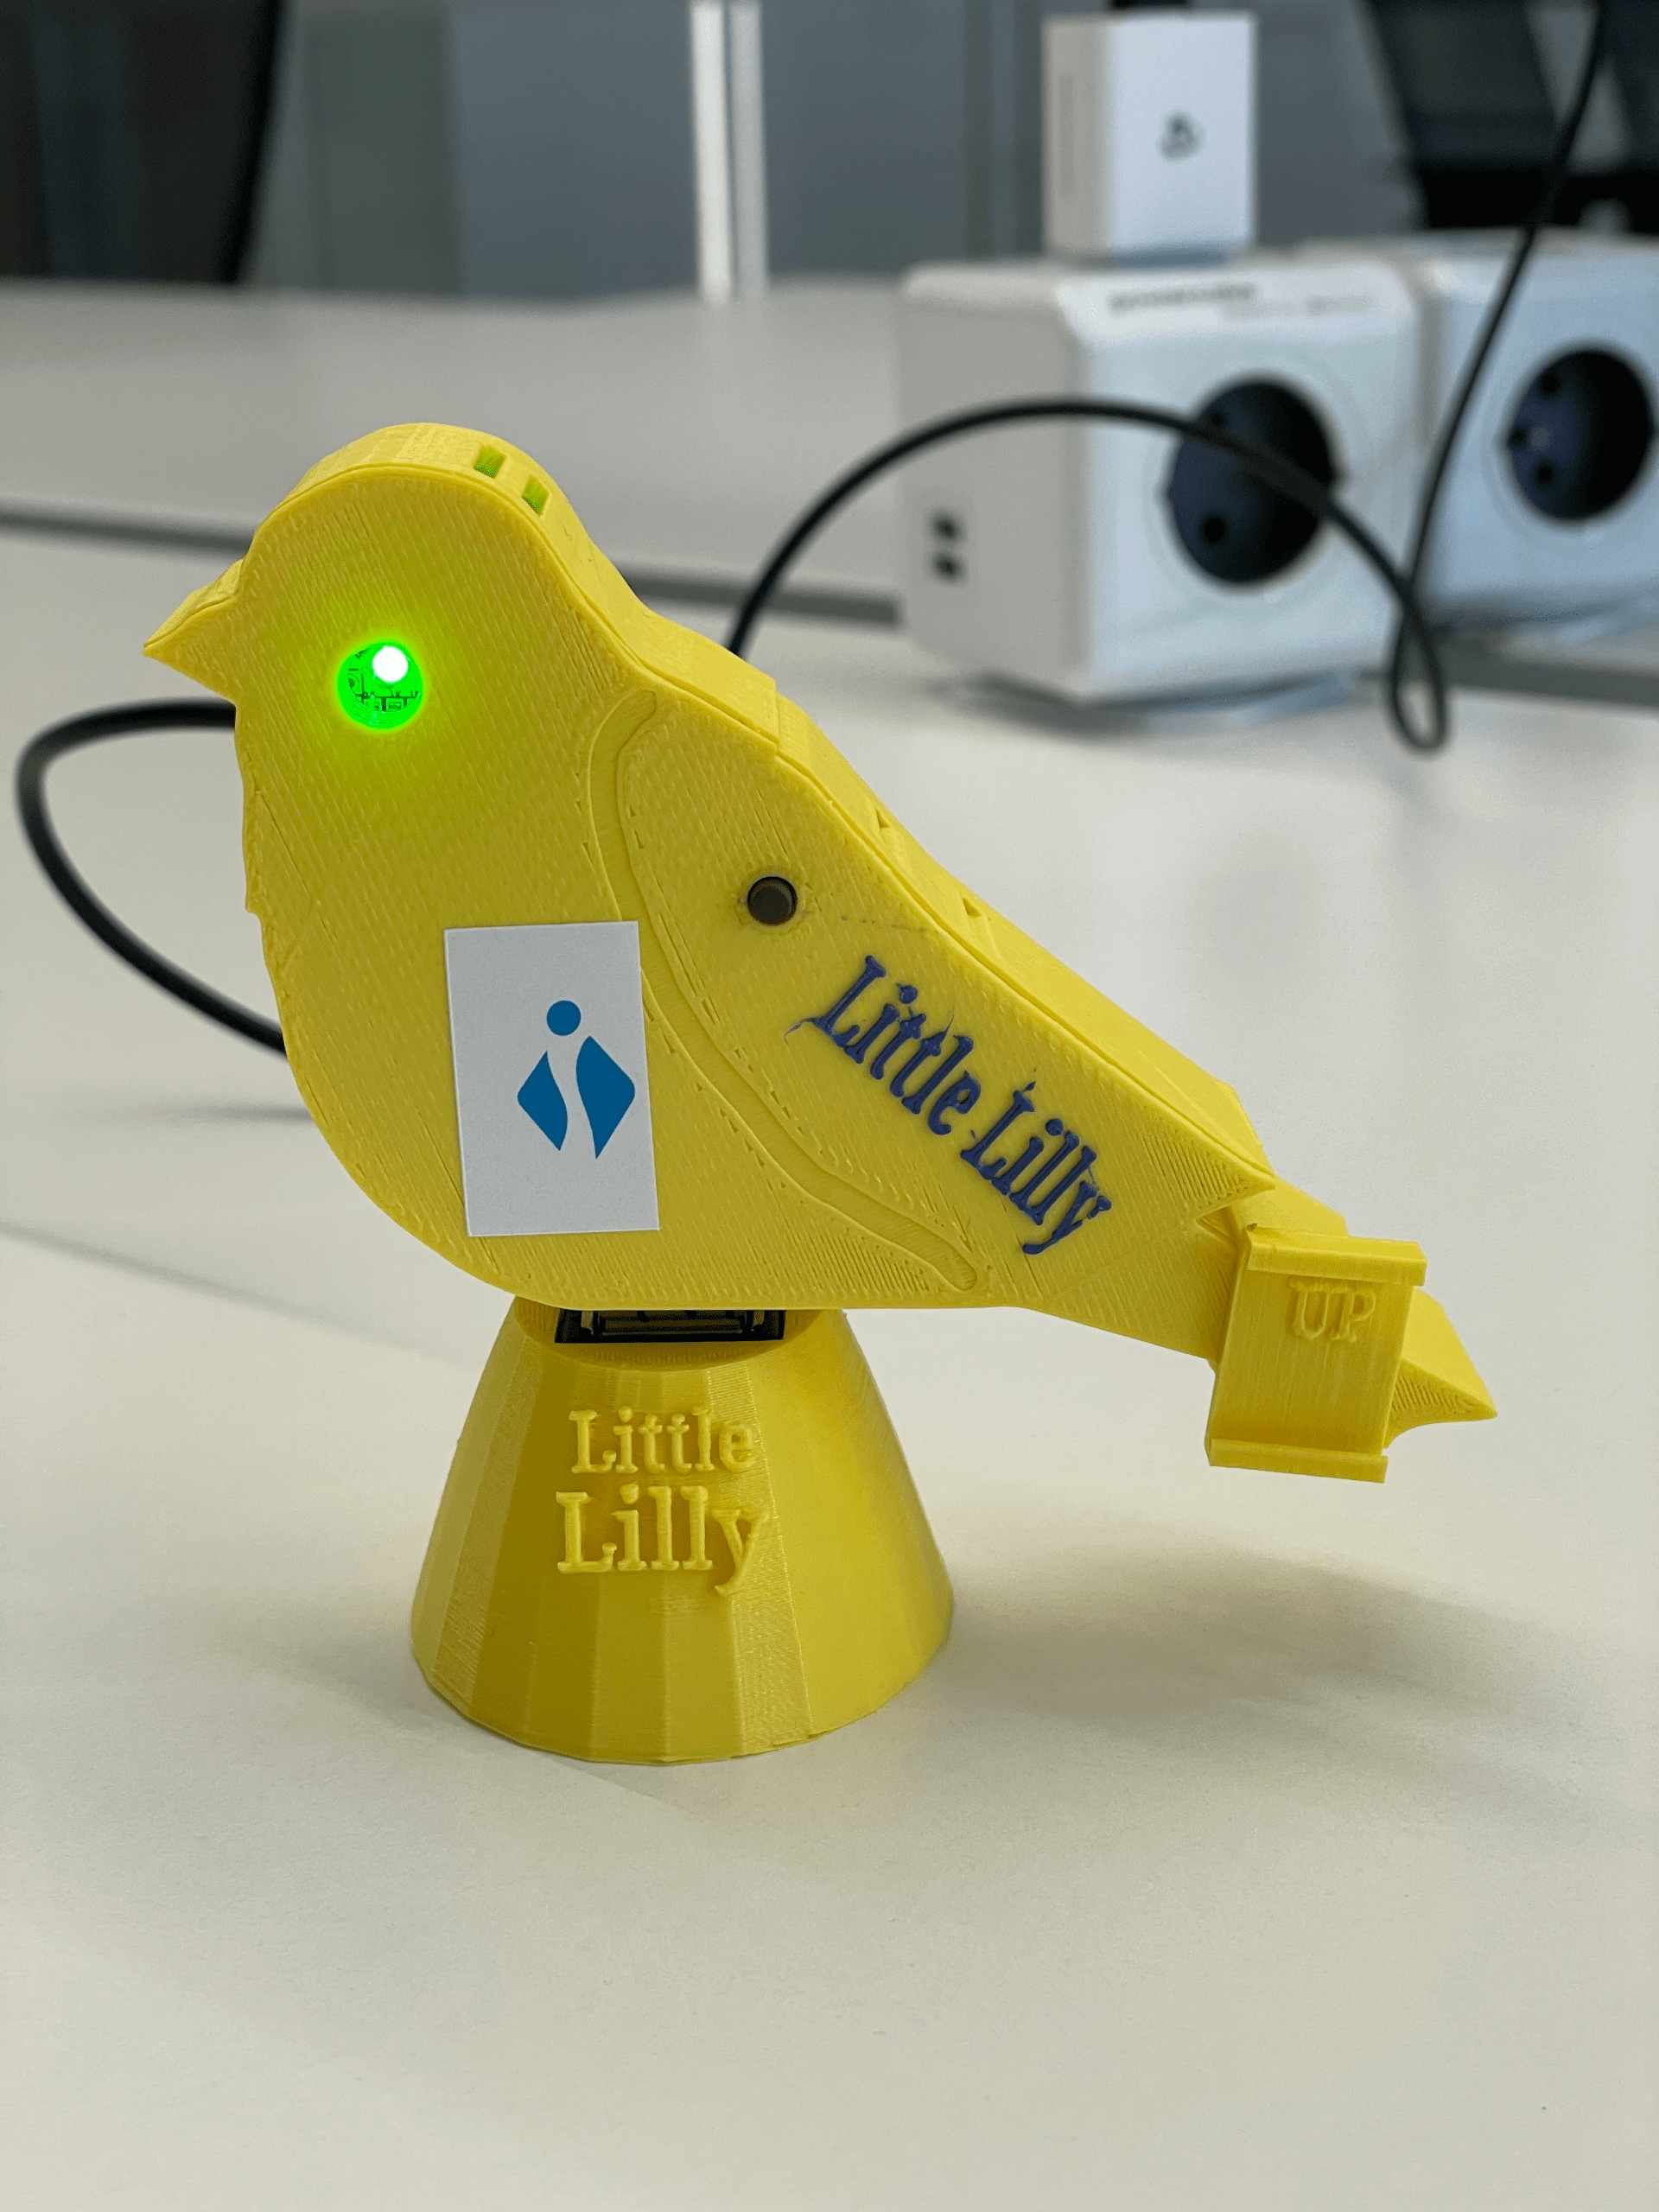 Picture of 'Little Lilly': a yellow device in the shape of a canary with a green or red LED to signal good or bad air quality around the device